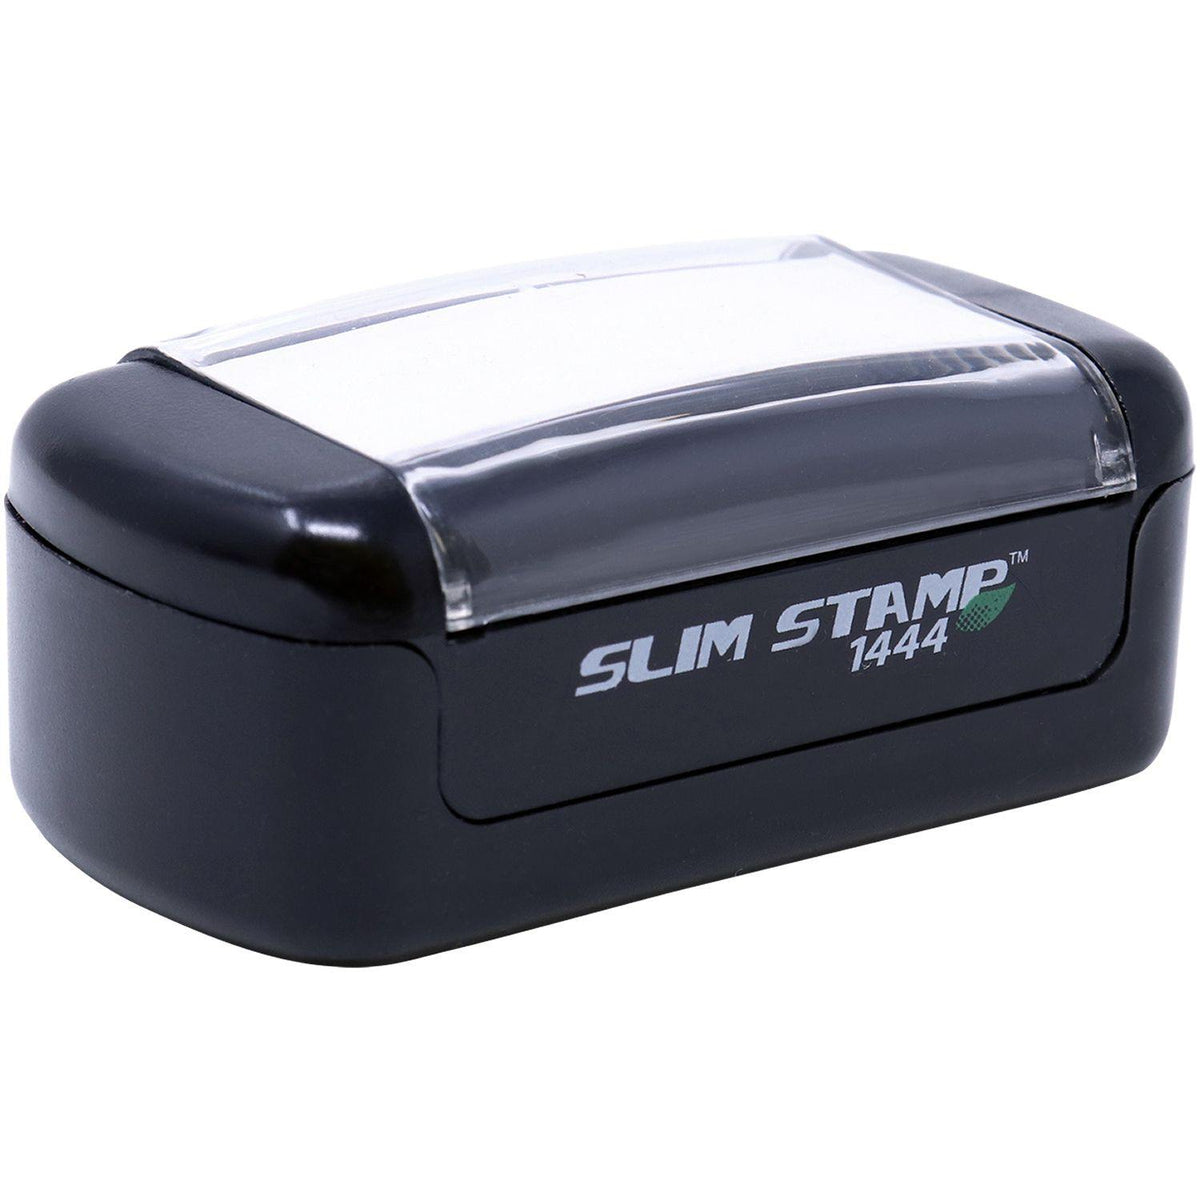 Alt View of Slim Pre-Inked Cleaned and Sanitized Stamp Mount Angle